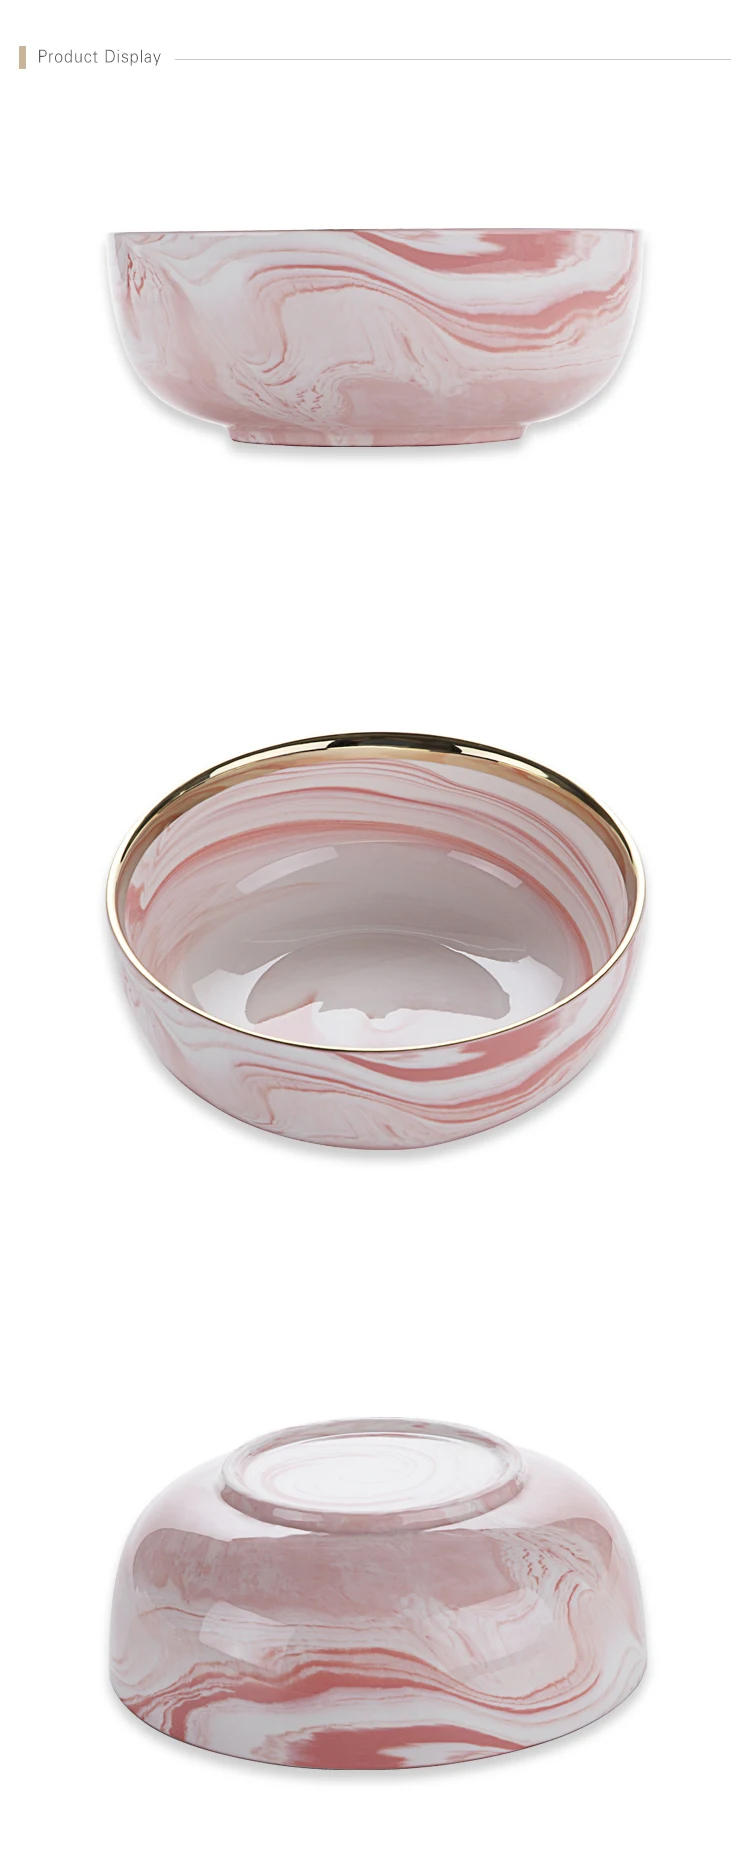 7.5 inch Deep Bowl for Hotel Kitchen Dinner Buffet Catering, Catering Crockery Marble Dinnerware Soup Bowl Ceramic&